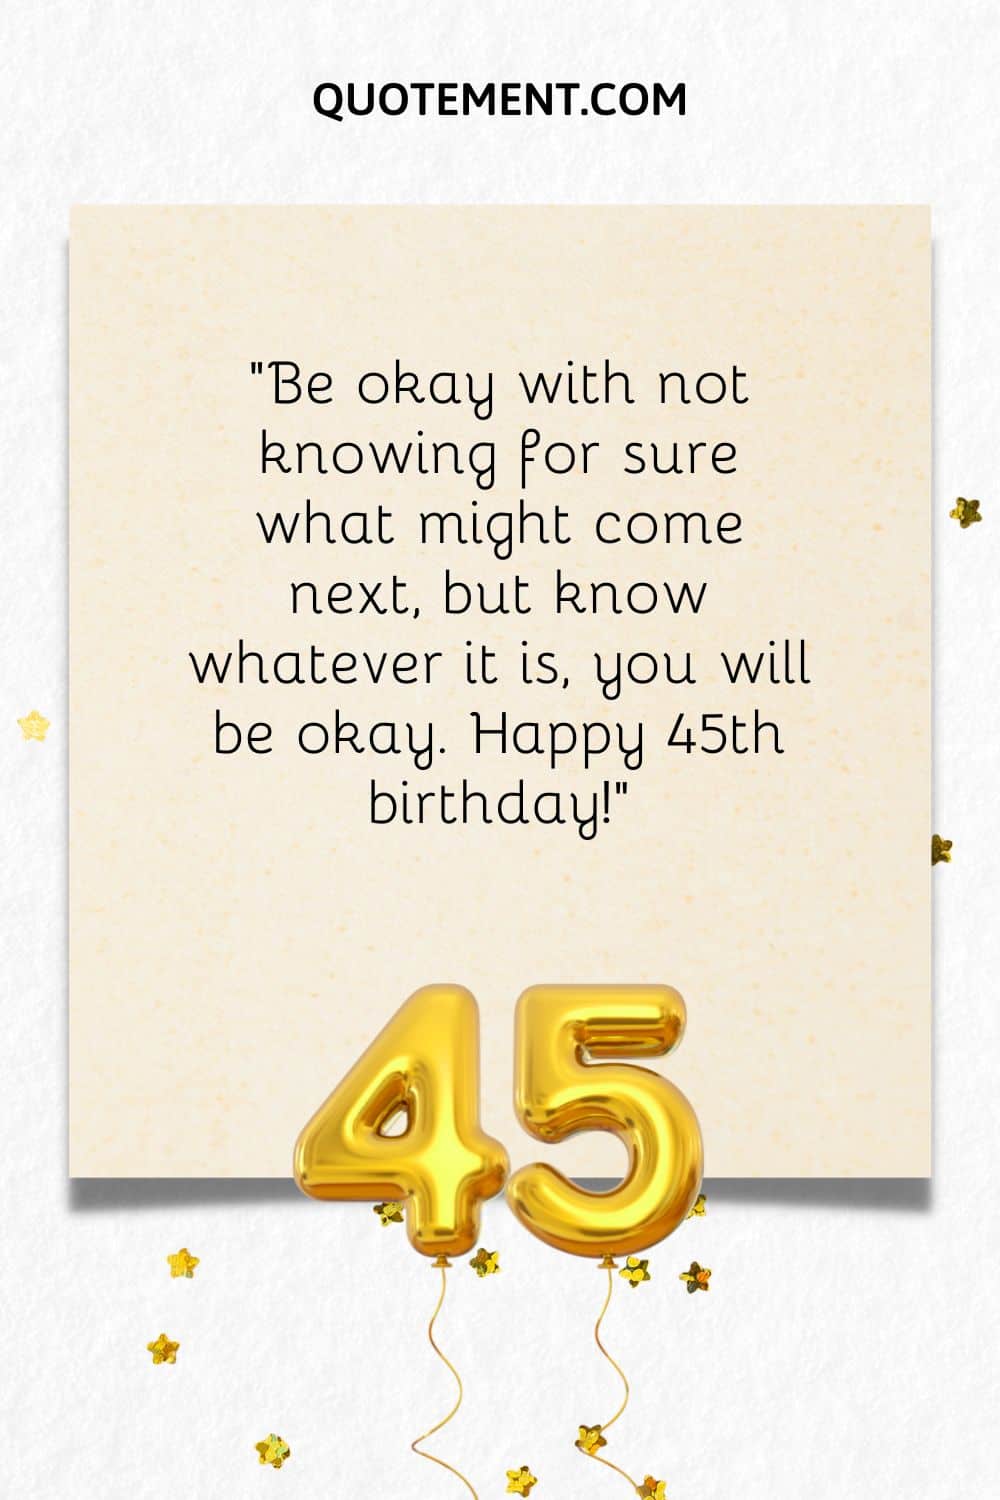 “Be okay with not knowing for sure what might come next, but know whatever it is, you will be okay. Happy 45th birthday!”